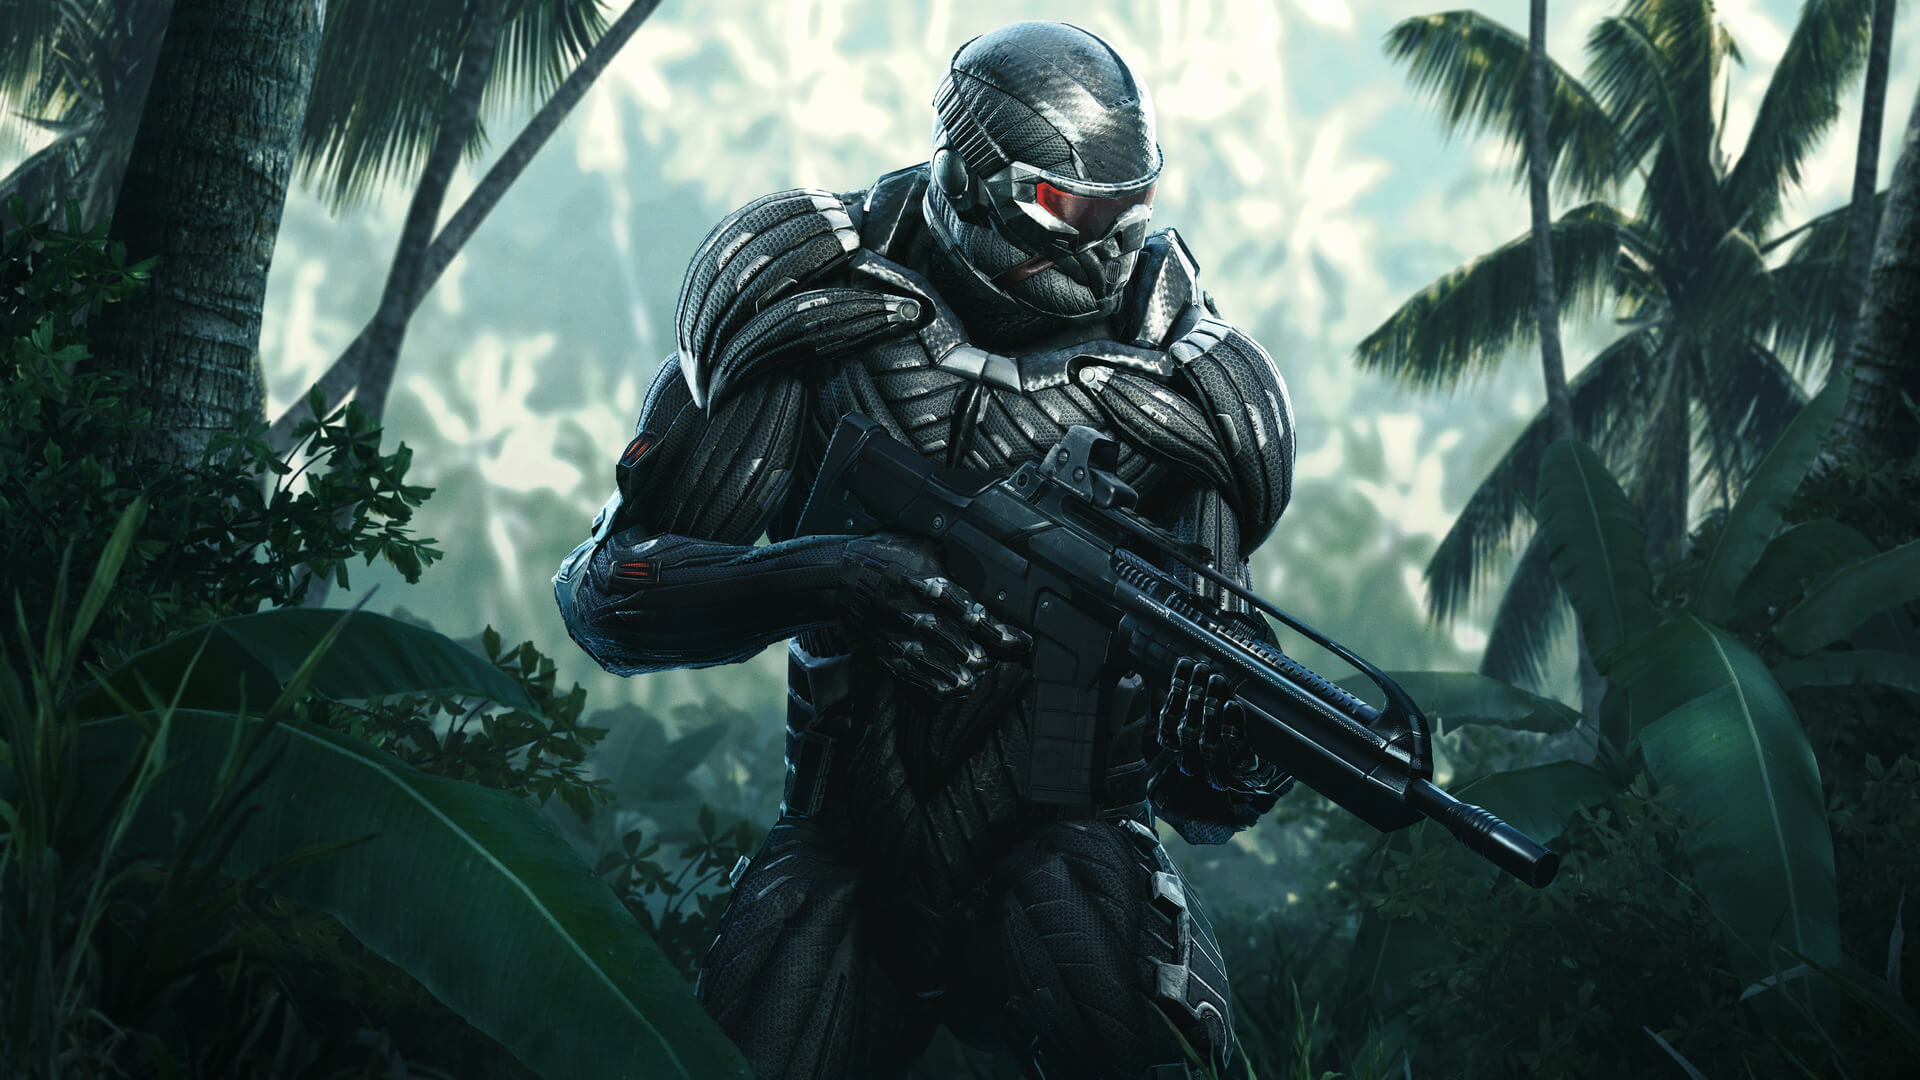 crysis-remastered-pc-update-2-1-2-released-adds-experimental-raytracing-boost-mode